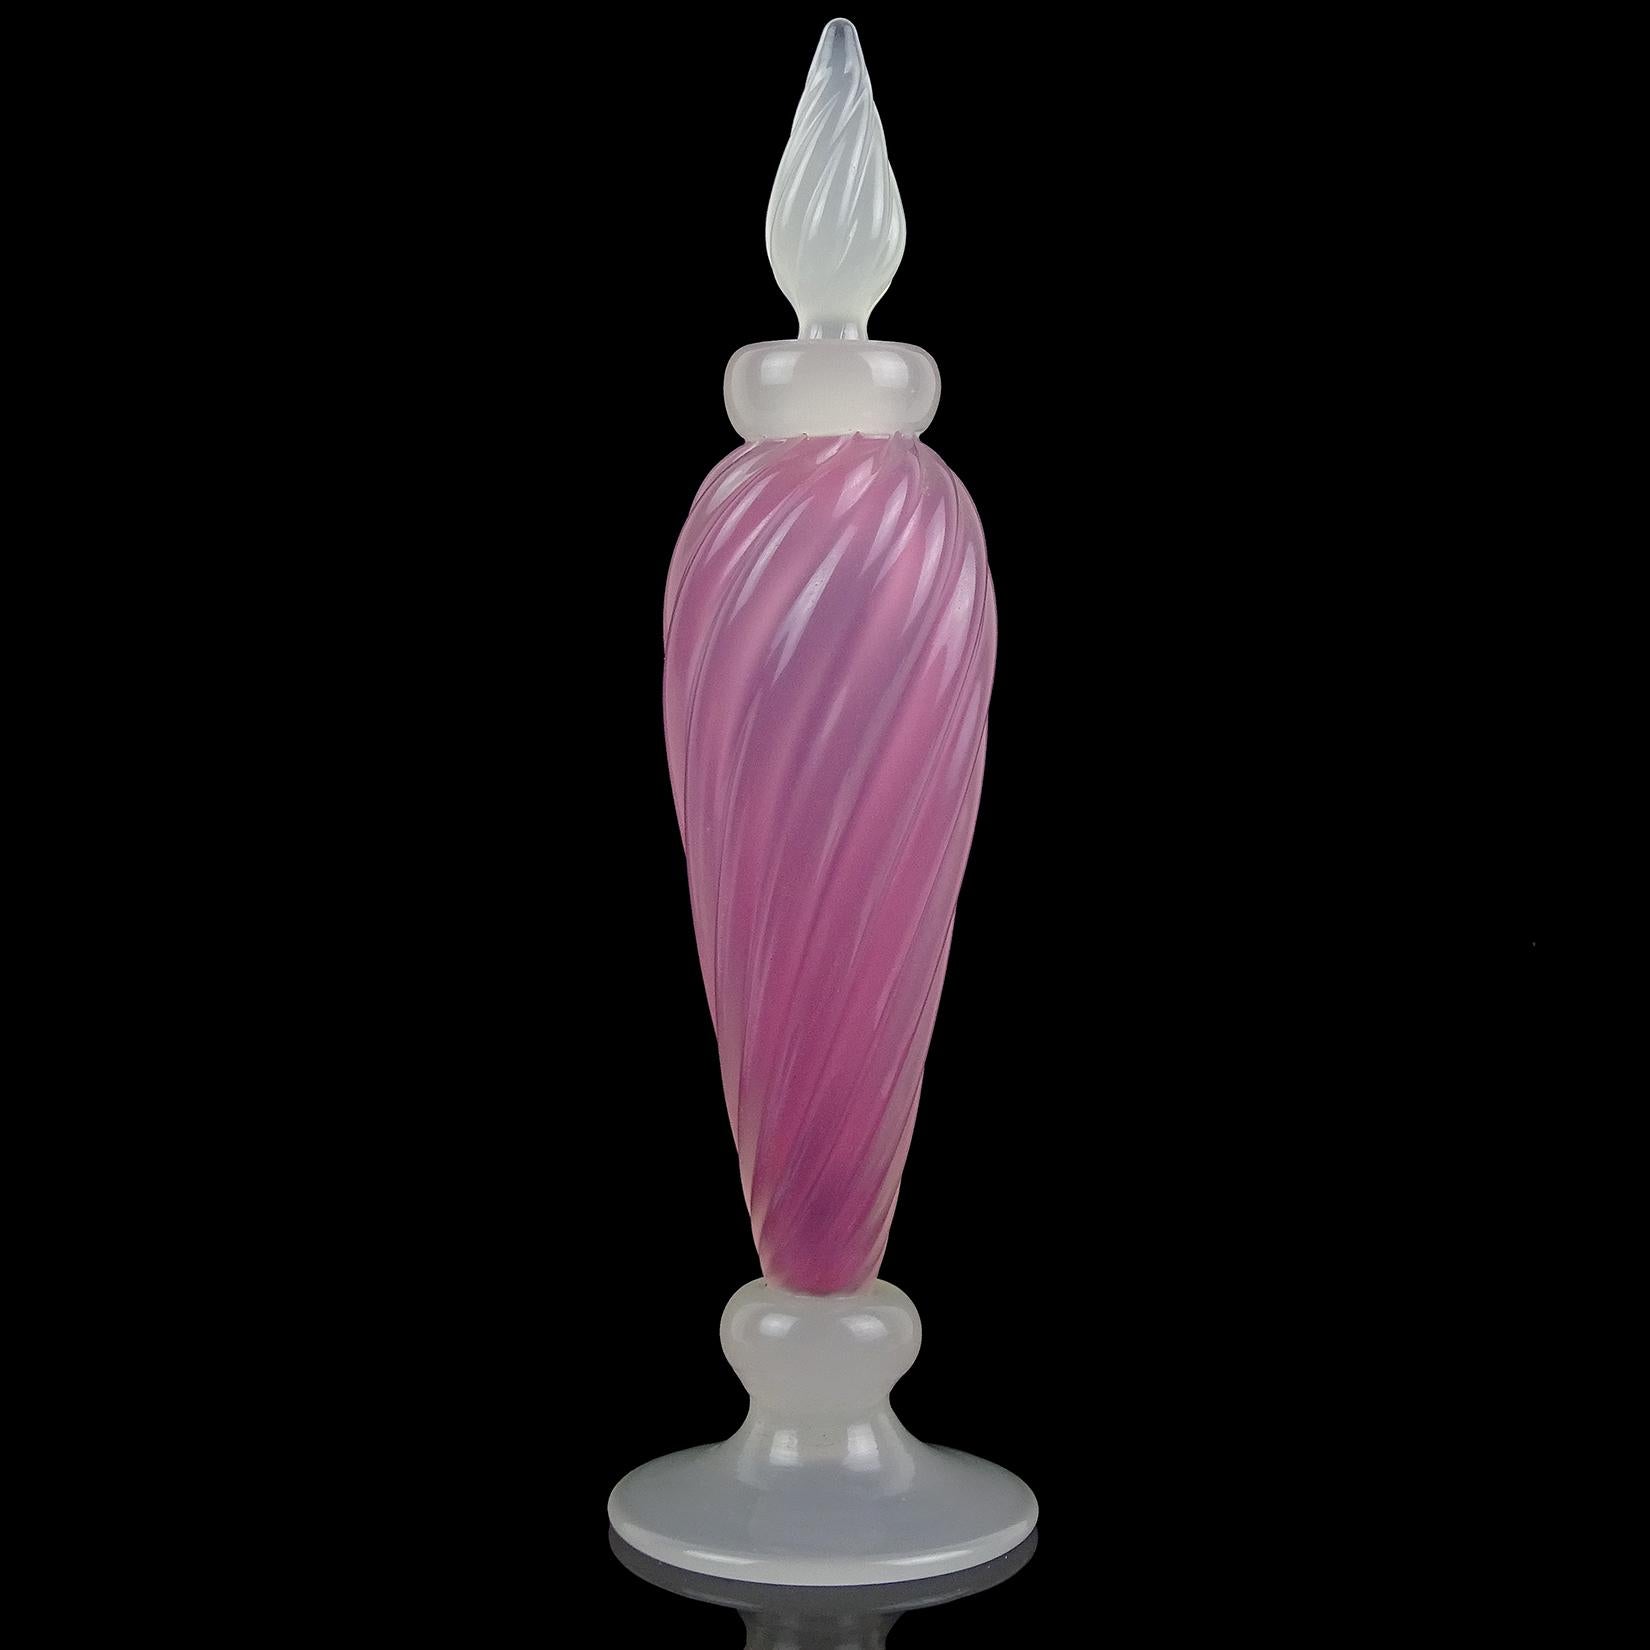 Beautiful vintage Murano hand blown opalescent white and pink Italian art glass perfume bottle. Documented to designer Archimede Seguso, in the 